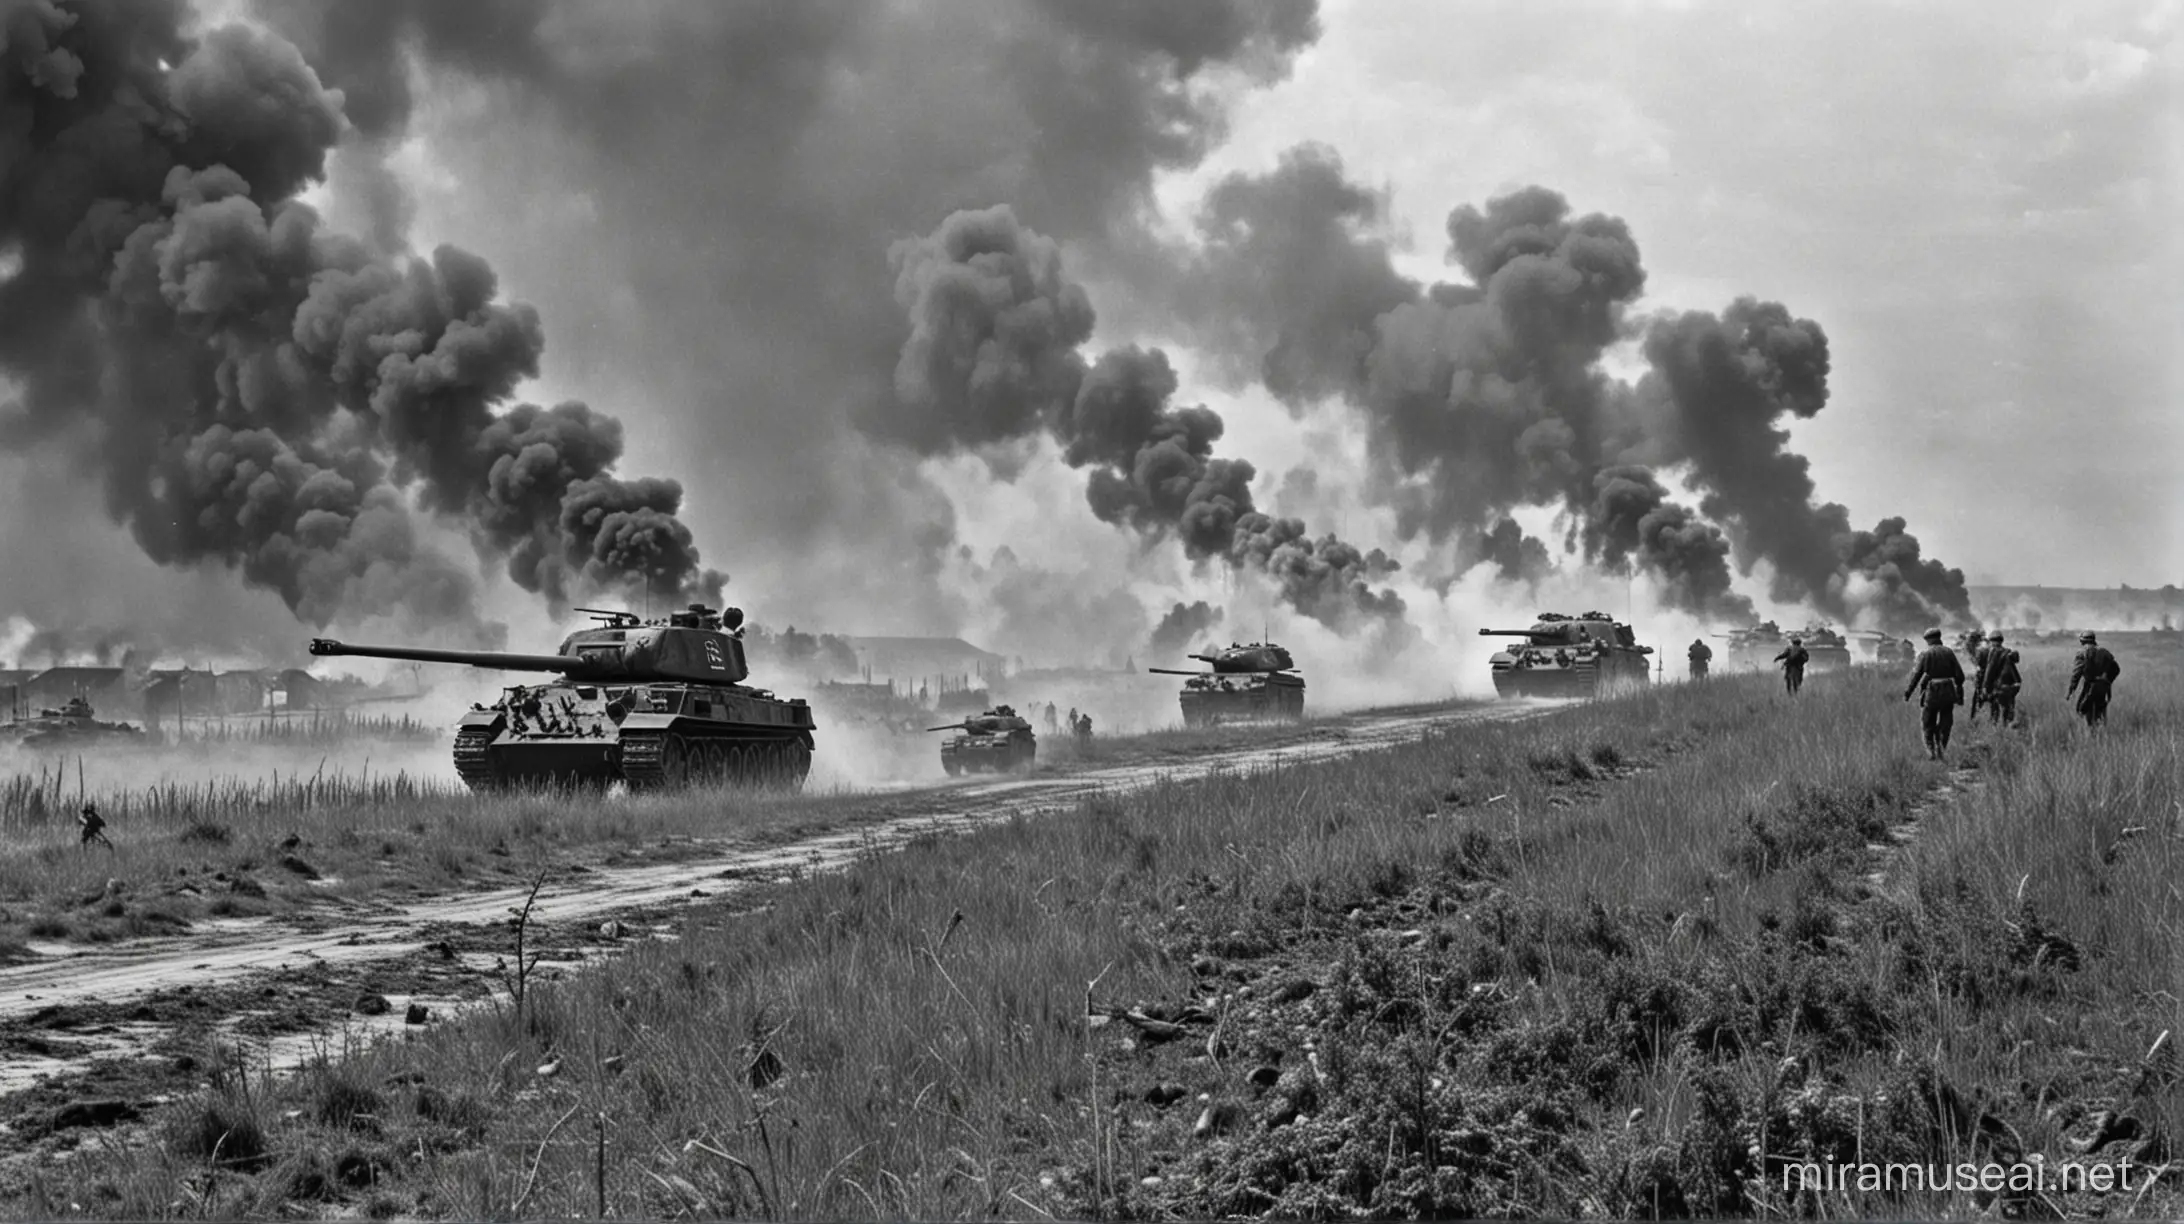 Operation Barbarossa, launched by Nazi Germany in June 1941, was the largest military invasion in history, aimed at conquering the Soviet Union. 